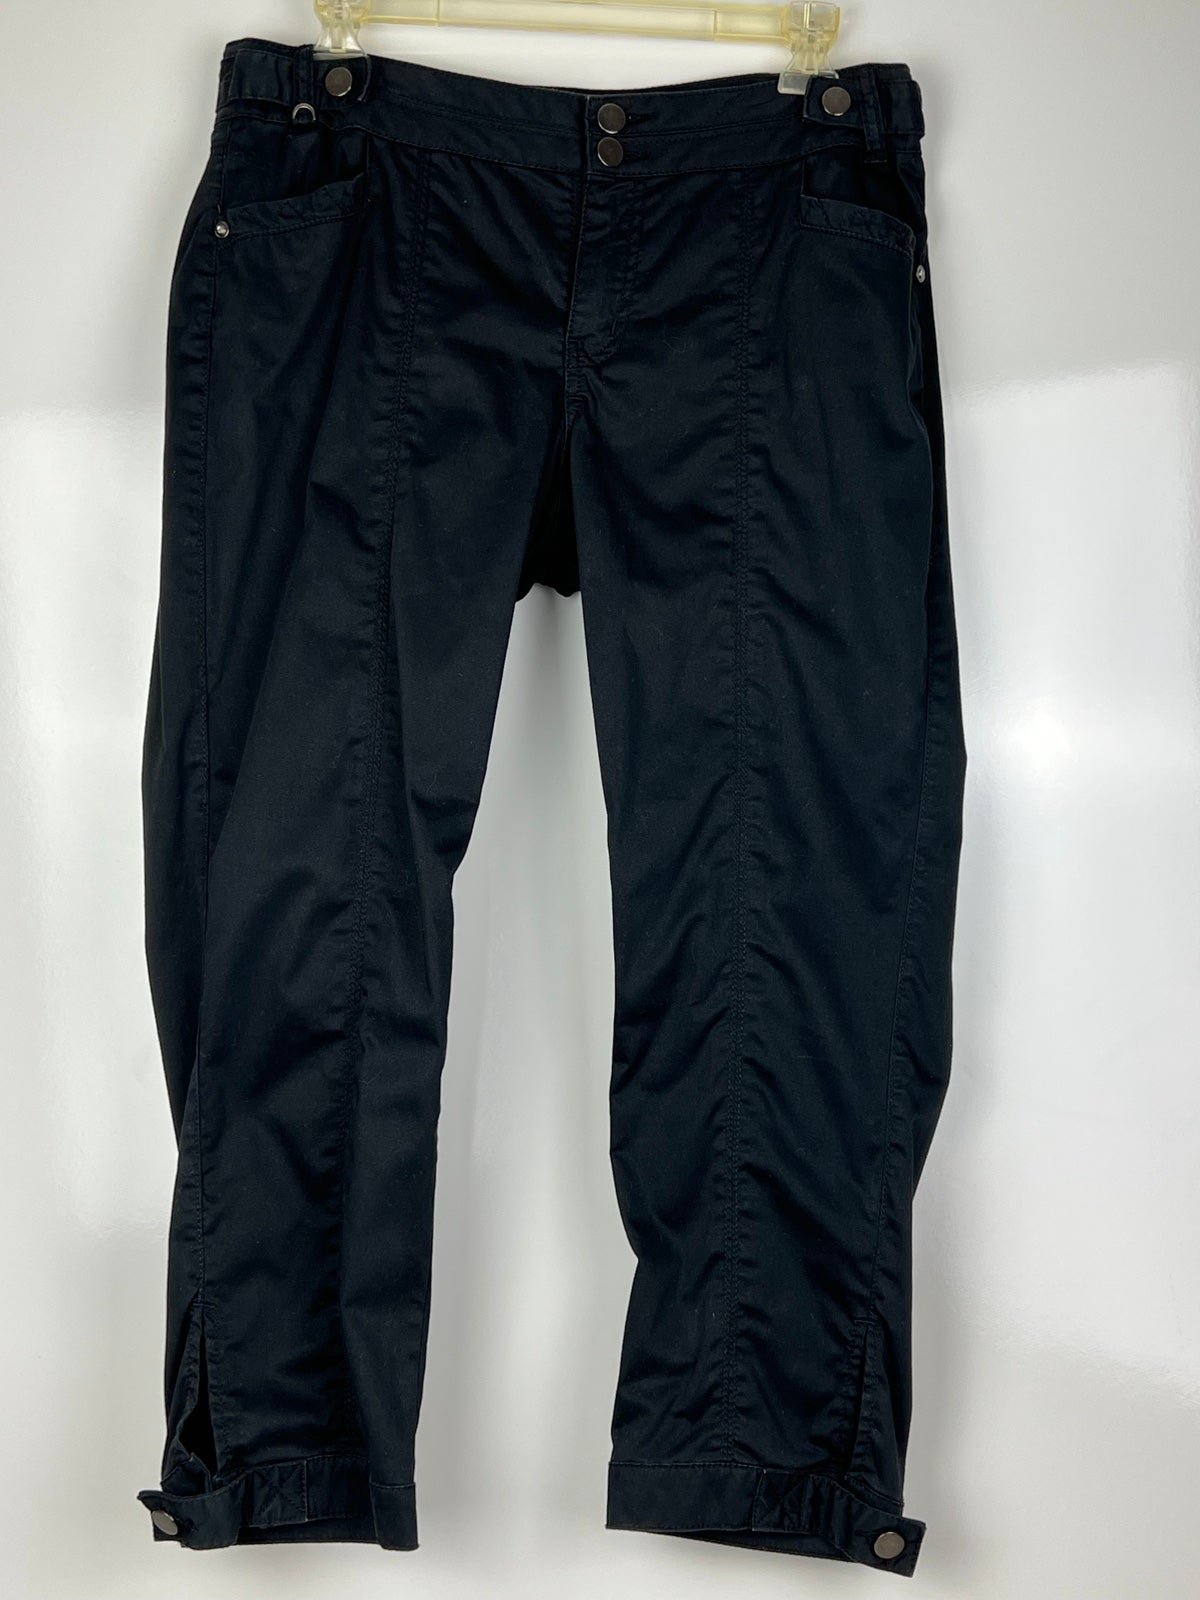 where to buy  Cache Dress Pants huo1oED1O Low Price